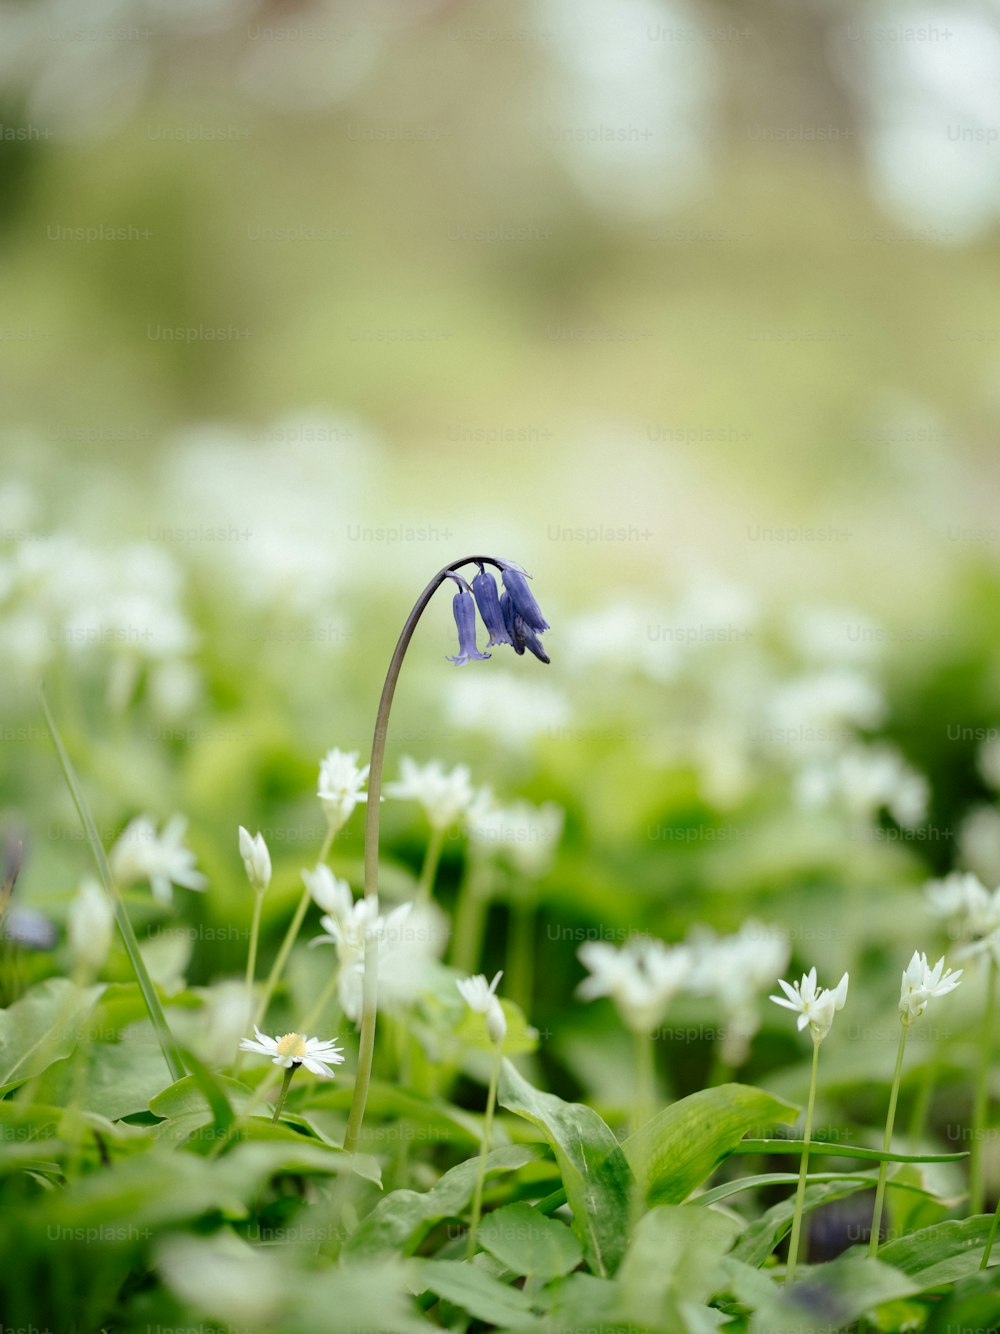 a small blue flower in a field of white flowers